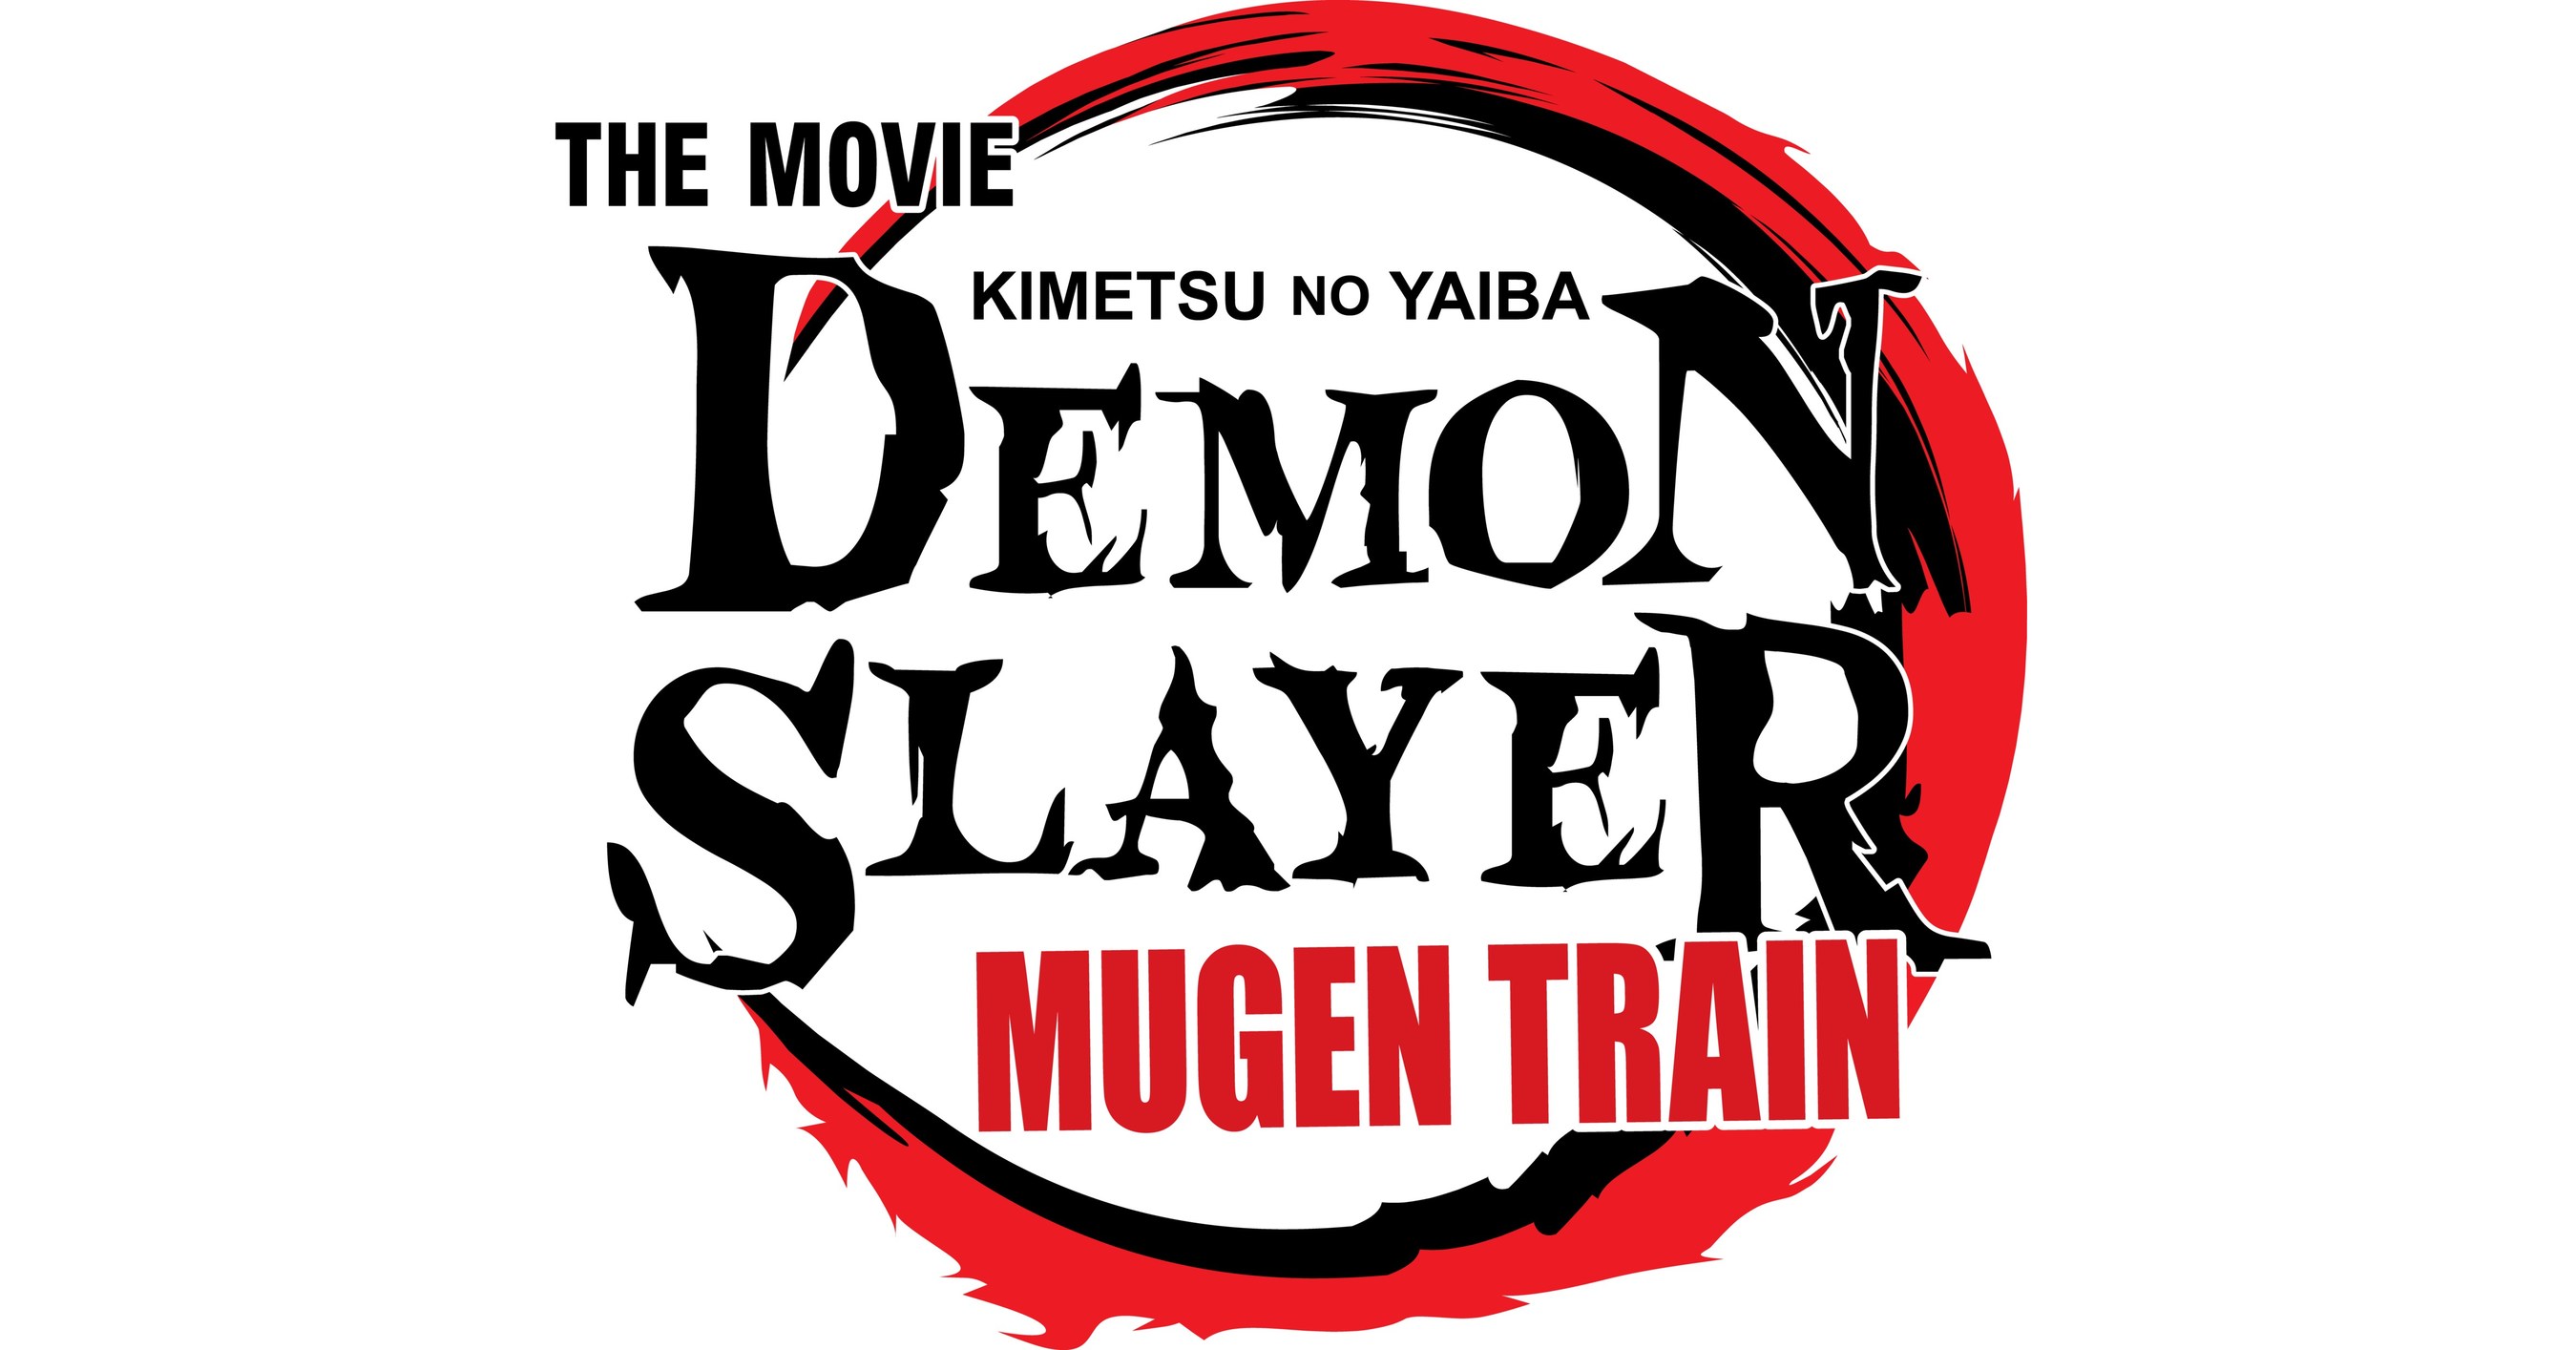 The Demon Slayer movie is finally coming to the US after breaking records  in Japan - The Verge